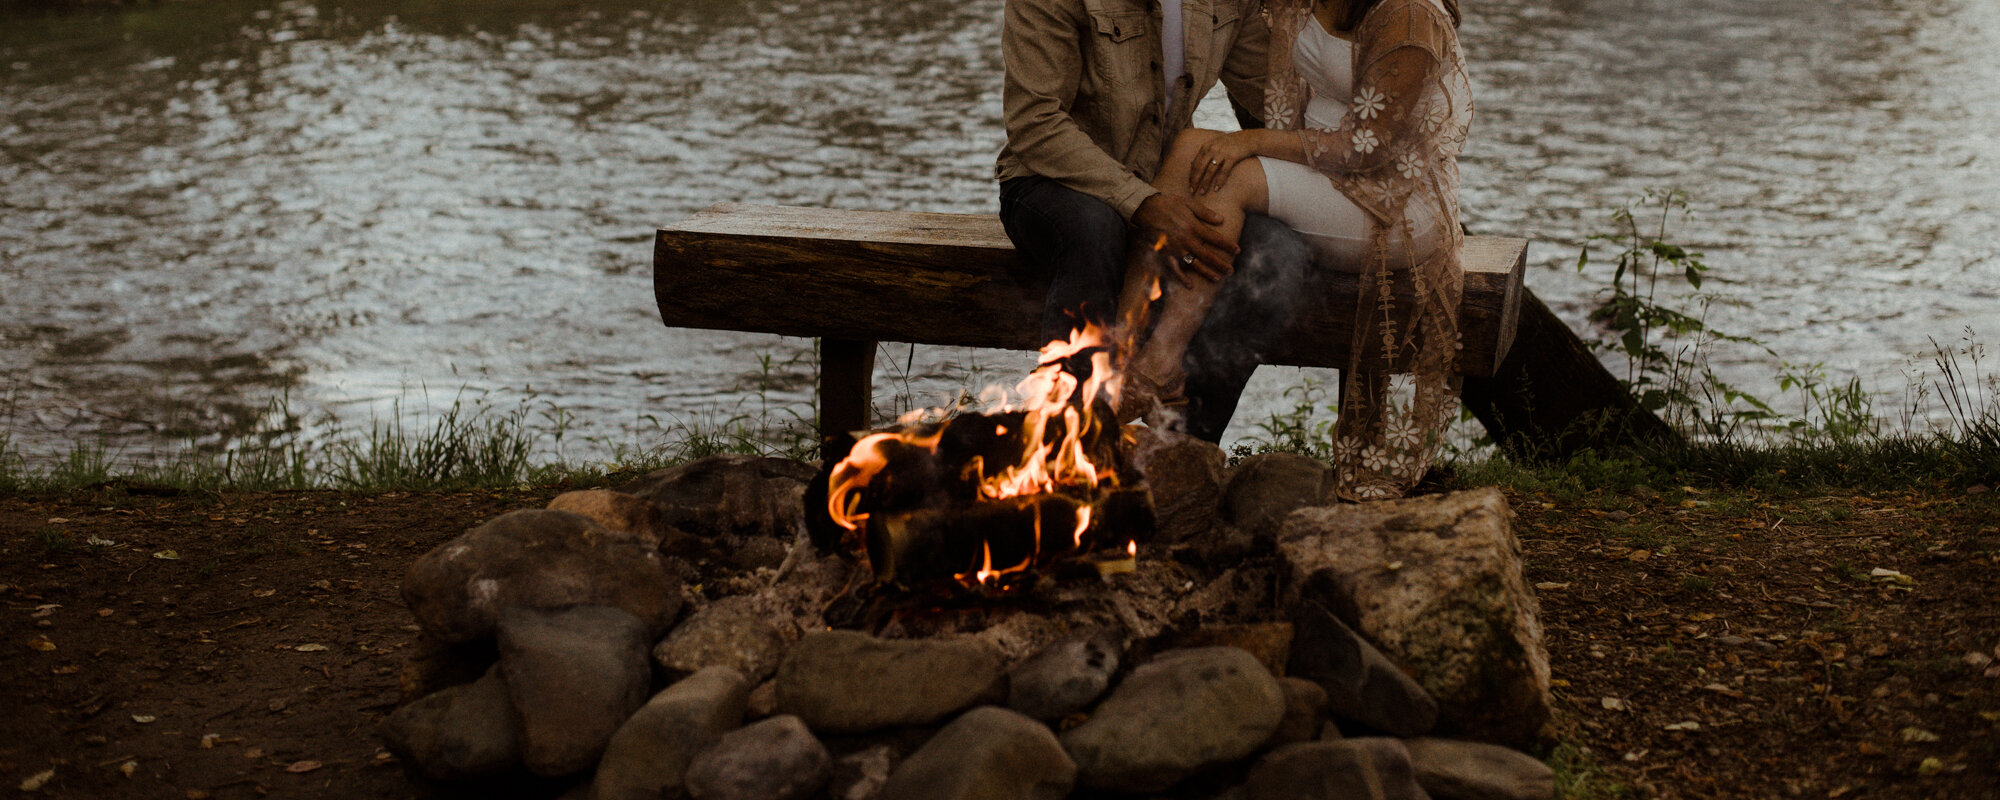 Antonia and Joey - Shenandoah River Engagement Session - Cabin and Bonfire Engagement Session - Blue Ridge Mountain Engagement_8.jpg